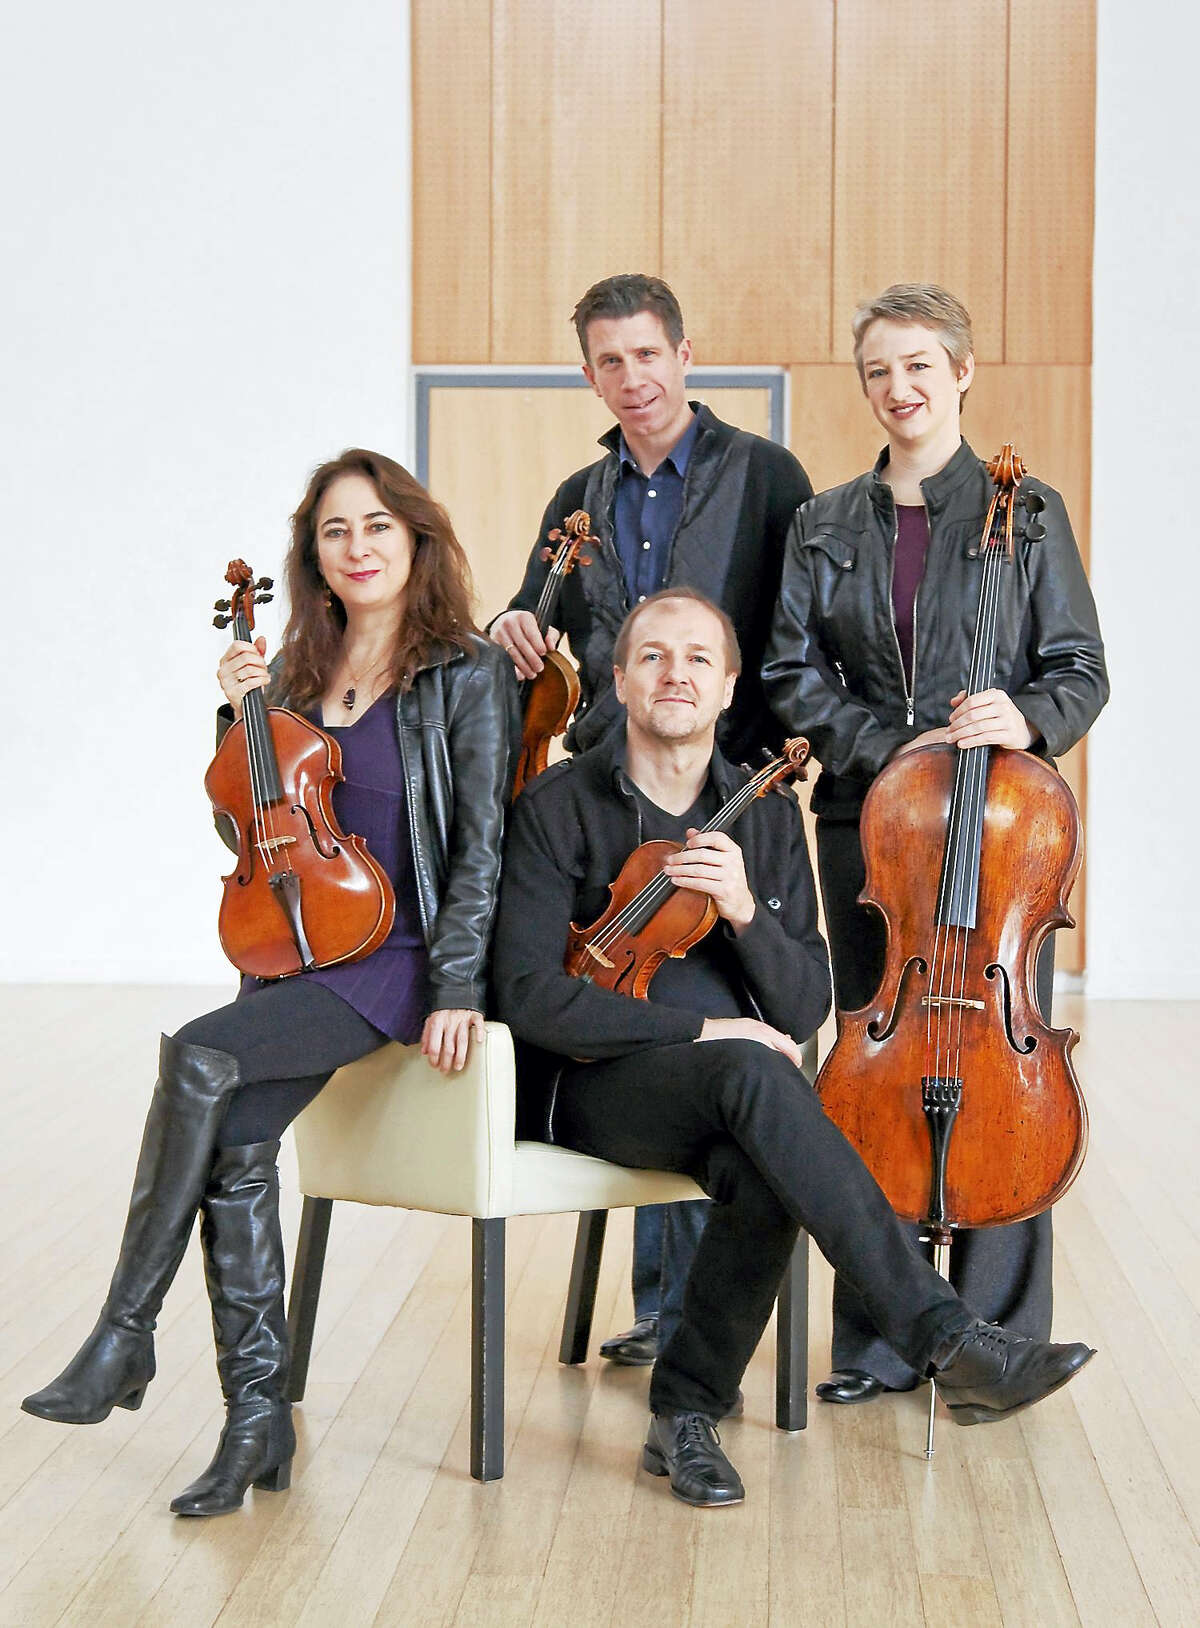 The Penderecki String Quartet with guest artist Pamela Mia Paul, piano, performs Sunday at Music Mountain. Selections include Mozart: String Quartet in D Major, K. 575; Schumann: String Quartet in A Major, Opus 41 #3; and Dvorak: Piano Quintet in A Major, Opus 81.